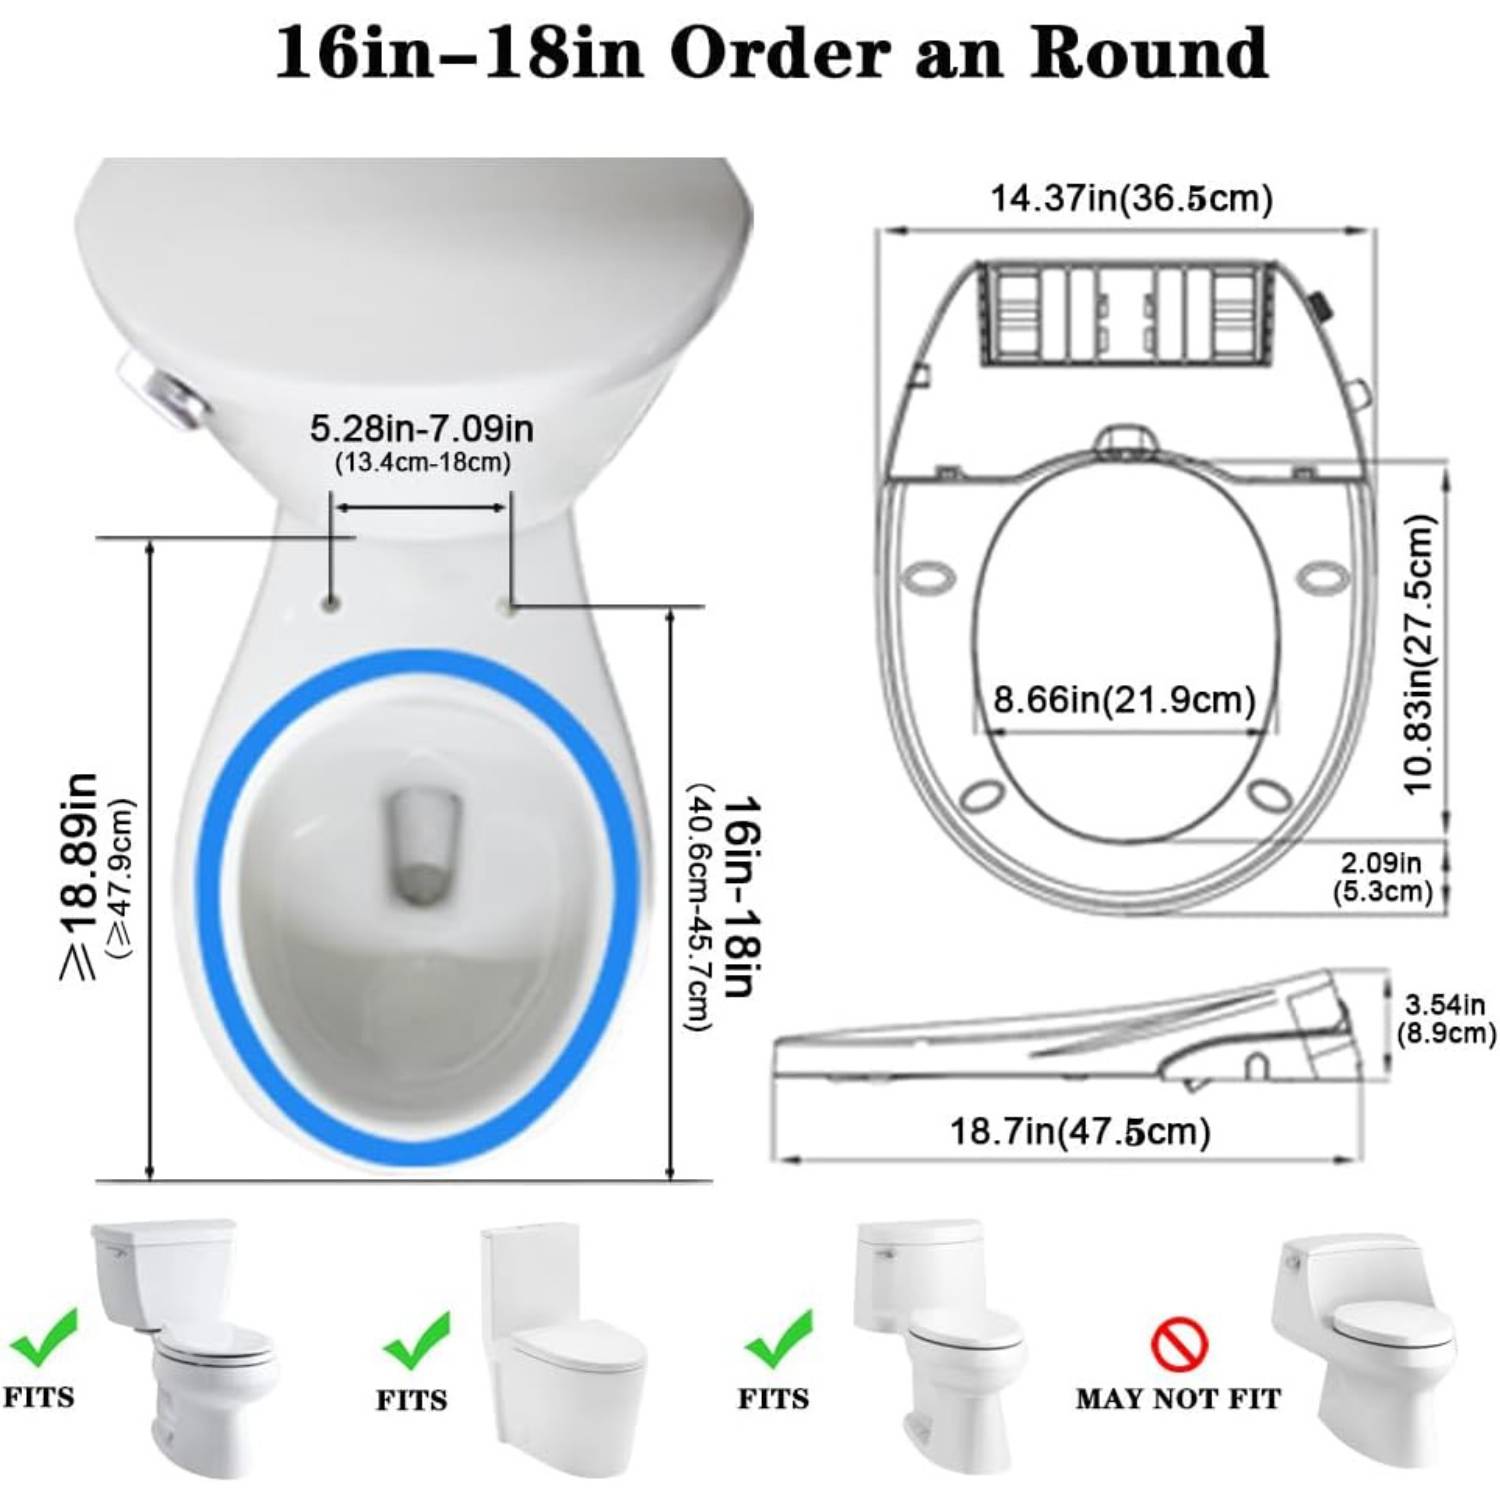 * Toilet Seat and Bidet - Buy Online & Save | Australia Wide Delivery